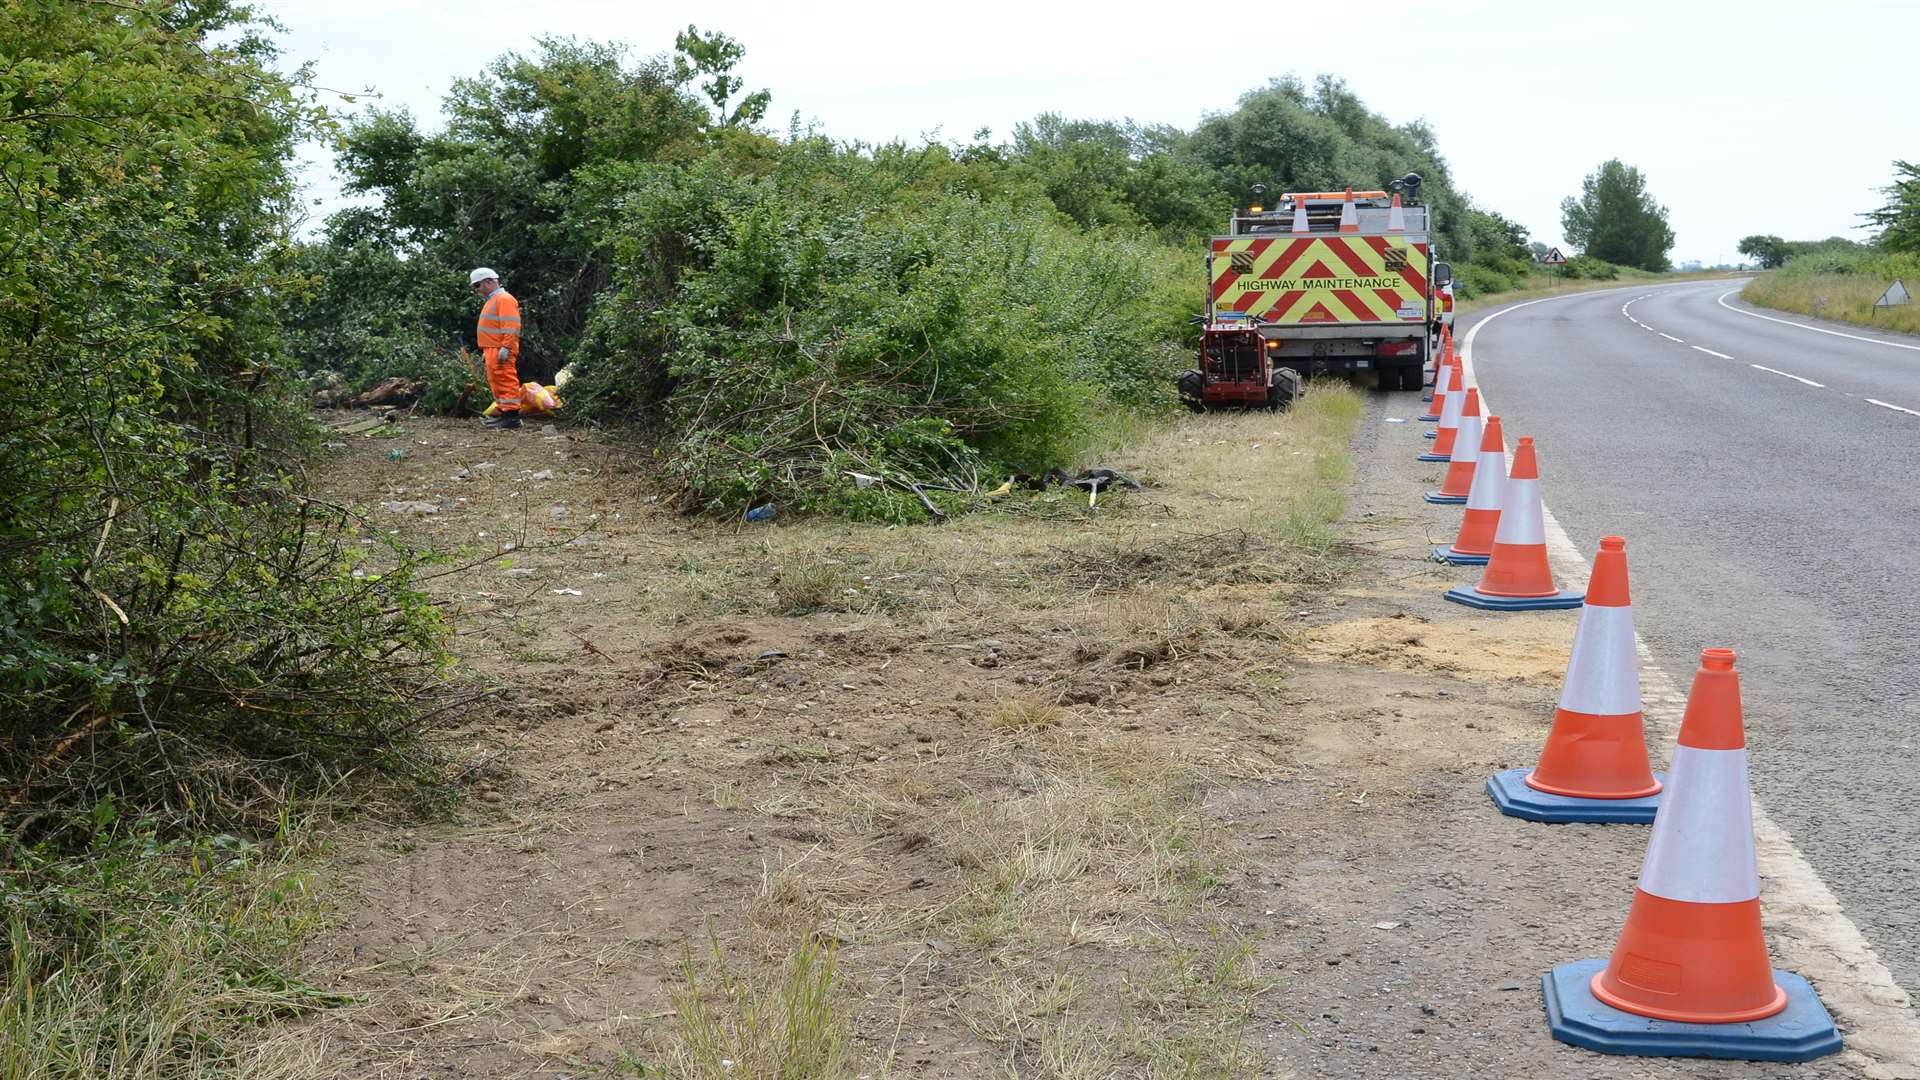 Traffic cones left by highway workers dealing with the A2070 crash.